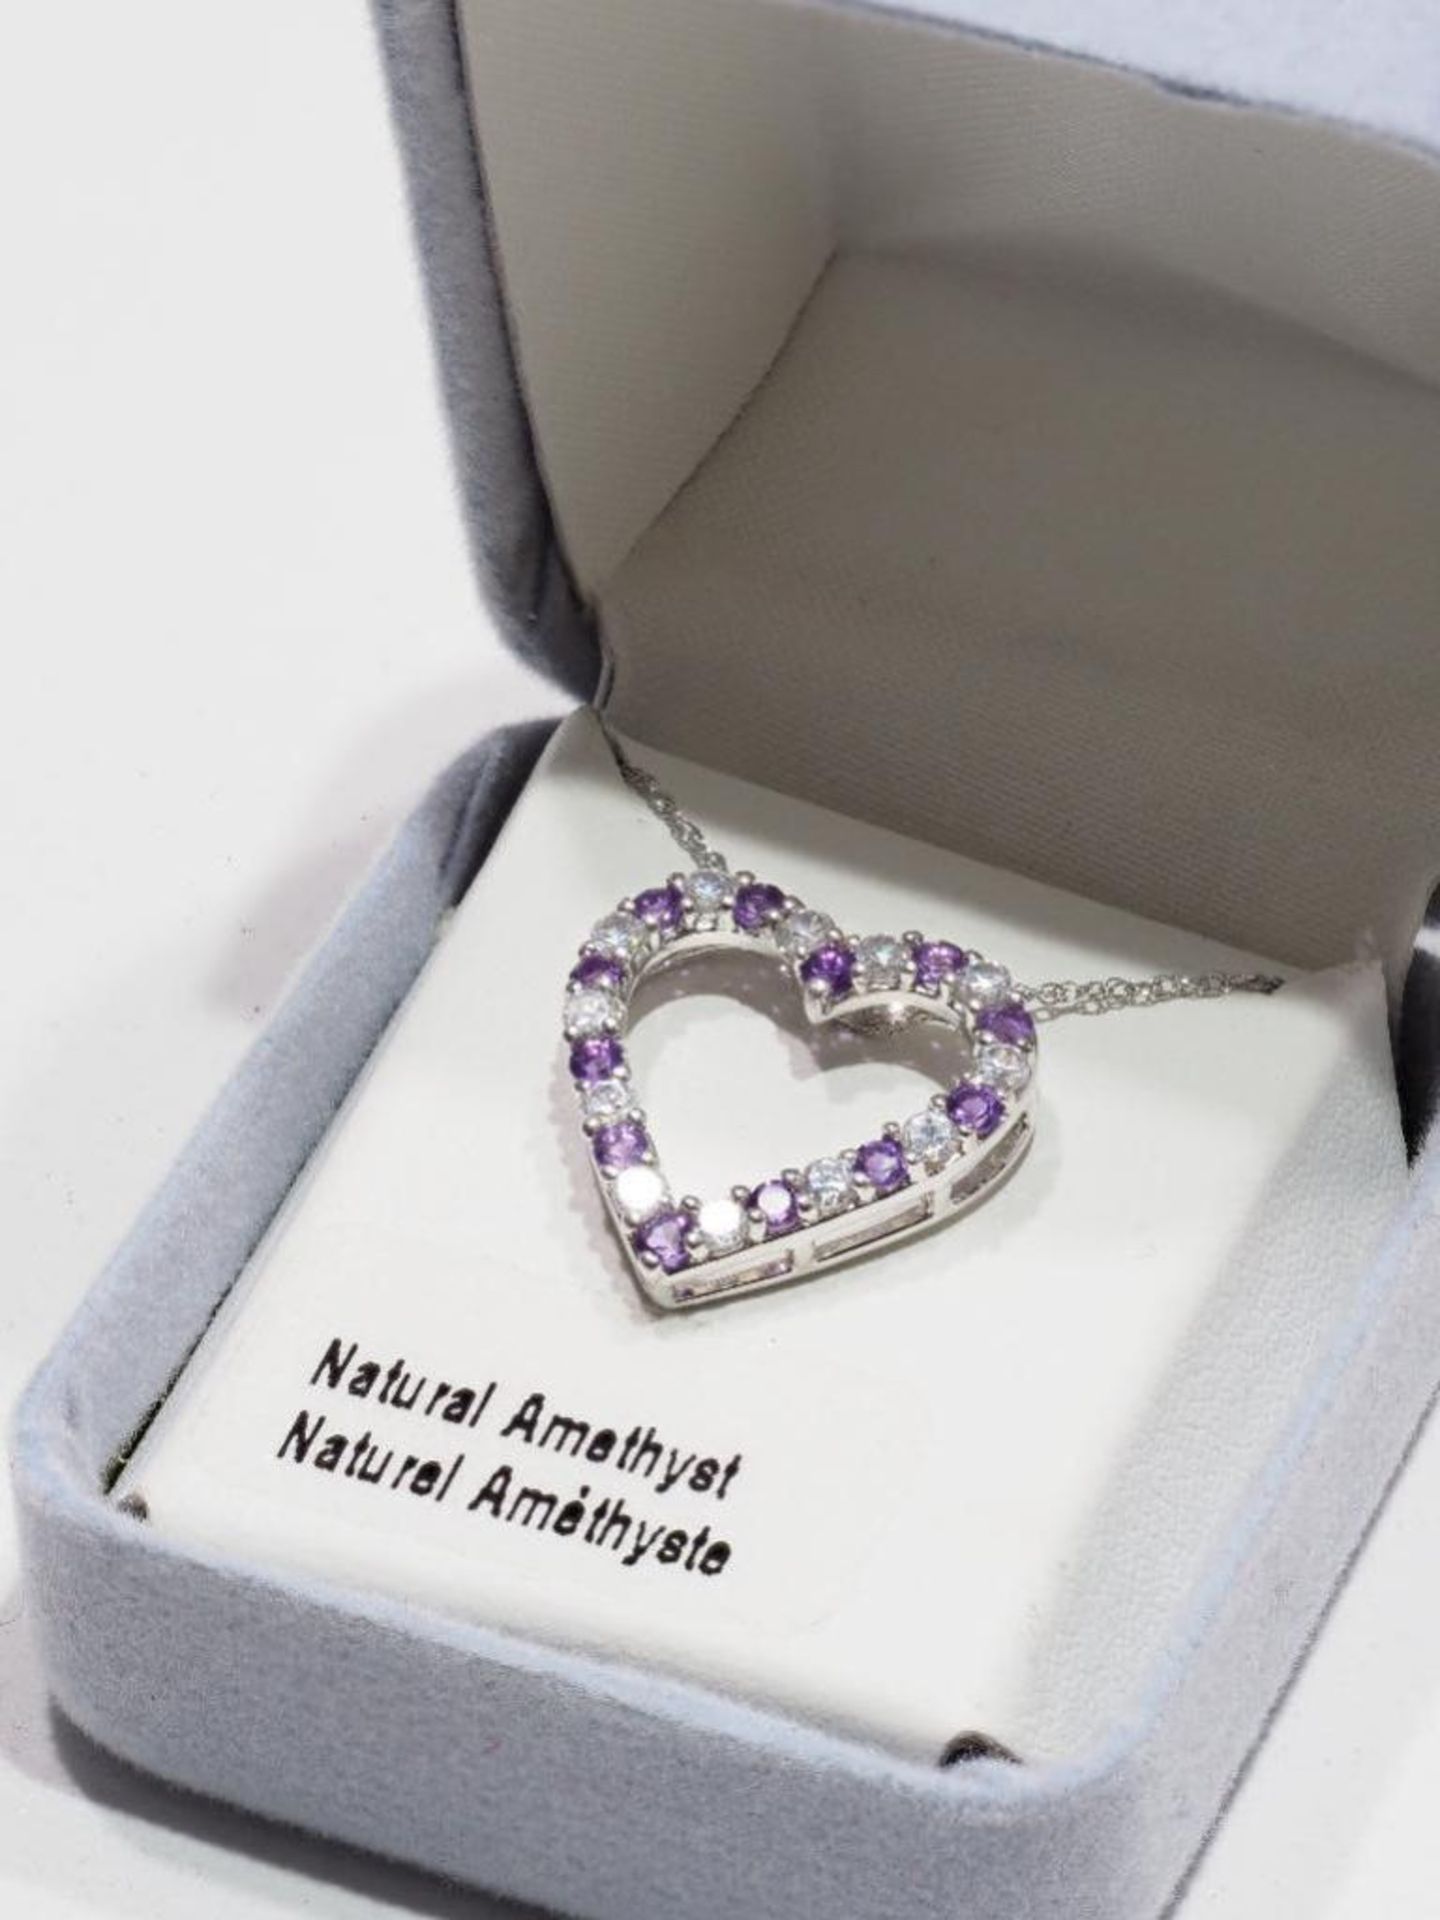 Sterling Silver Natural Amethyst (February Birthstone) Heart Shaped Pendant Necklace with Chain. Ret - Image 2 of 2